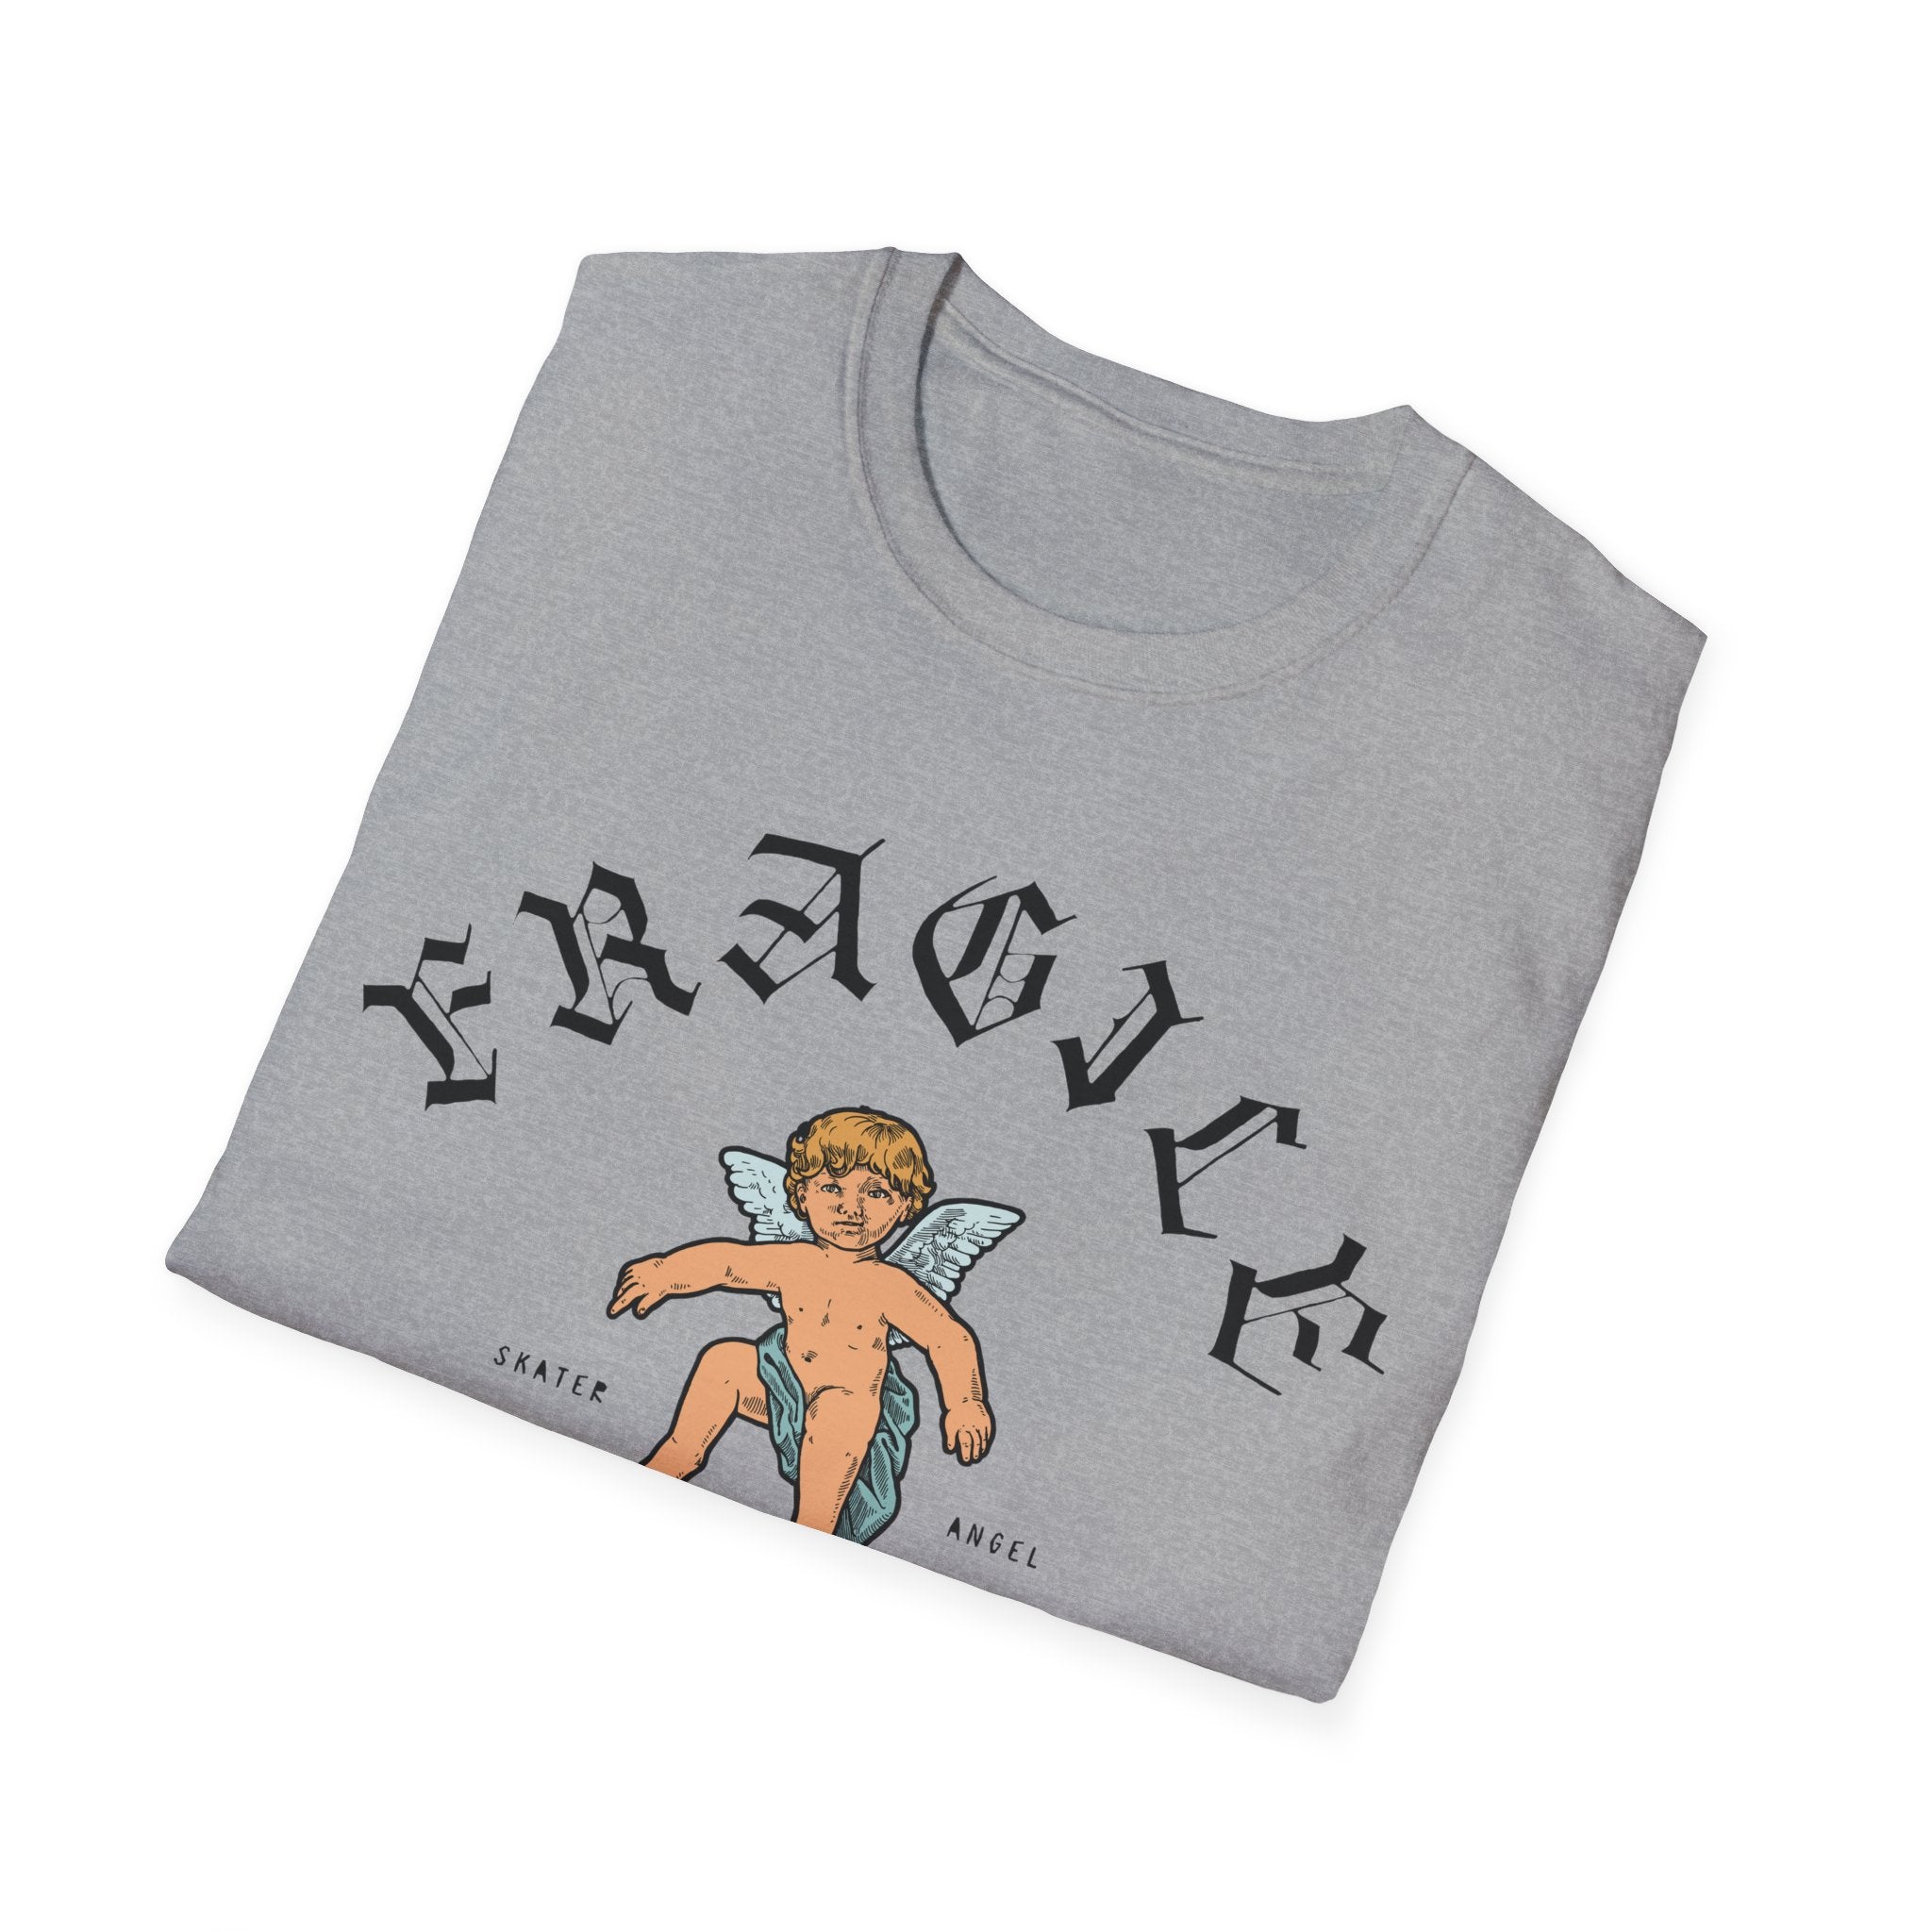 A soft, relaxed fit Skater Angel gray t-shirt with an image of a baby with the word fragile on it.